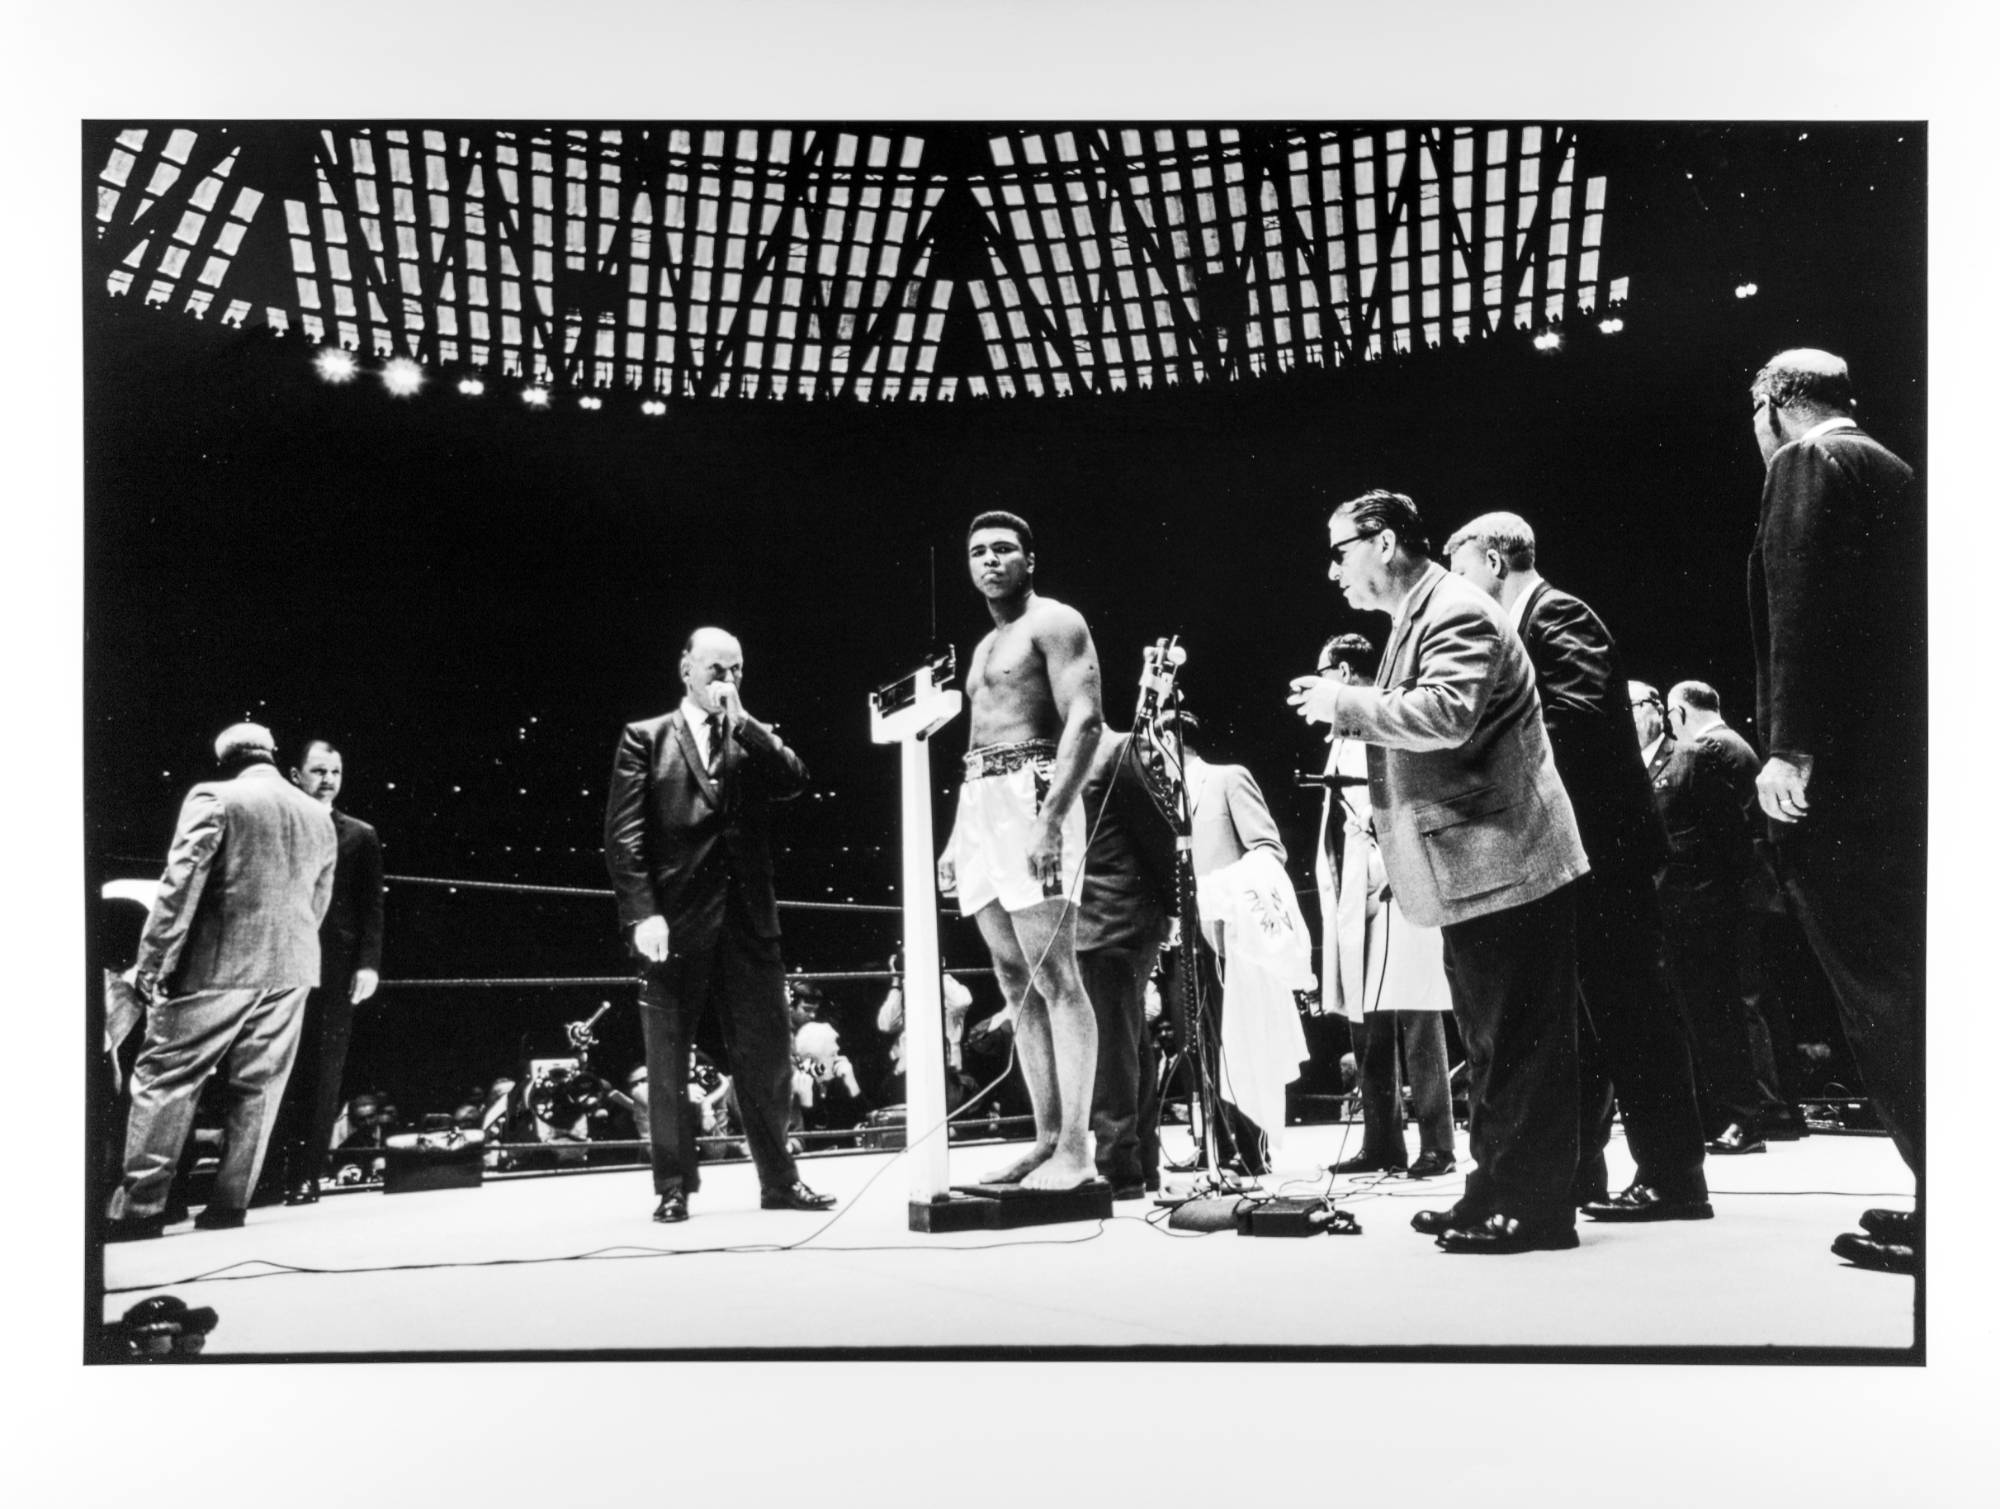 Boxer Mohammed Ali weighing-in for a fight in the middle of a boxing ring